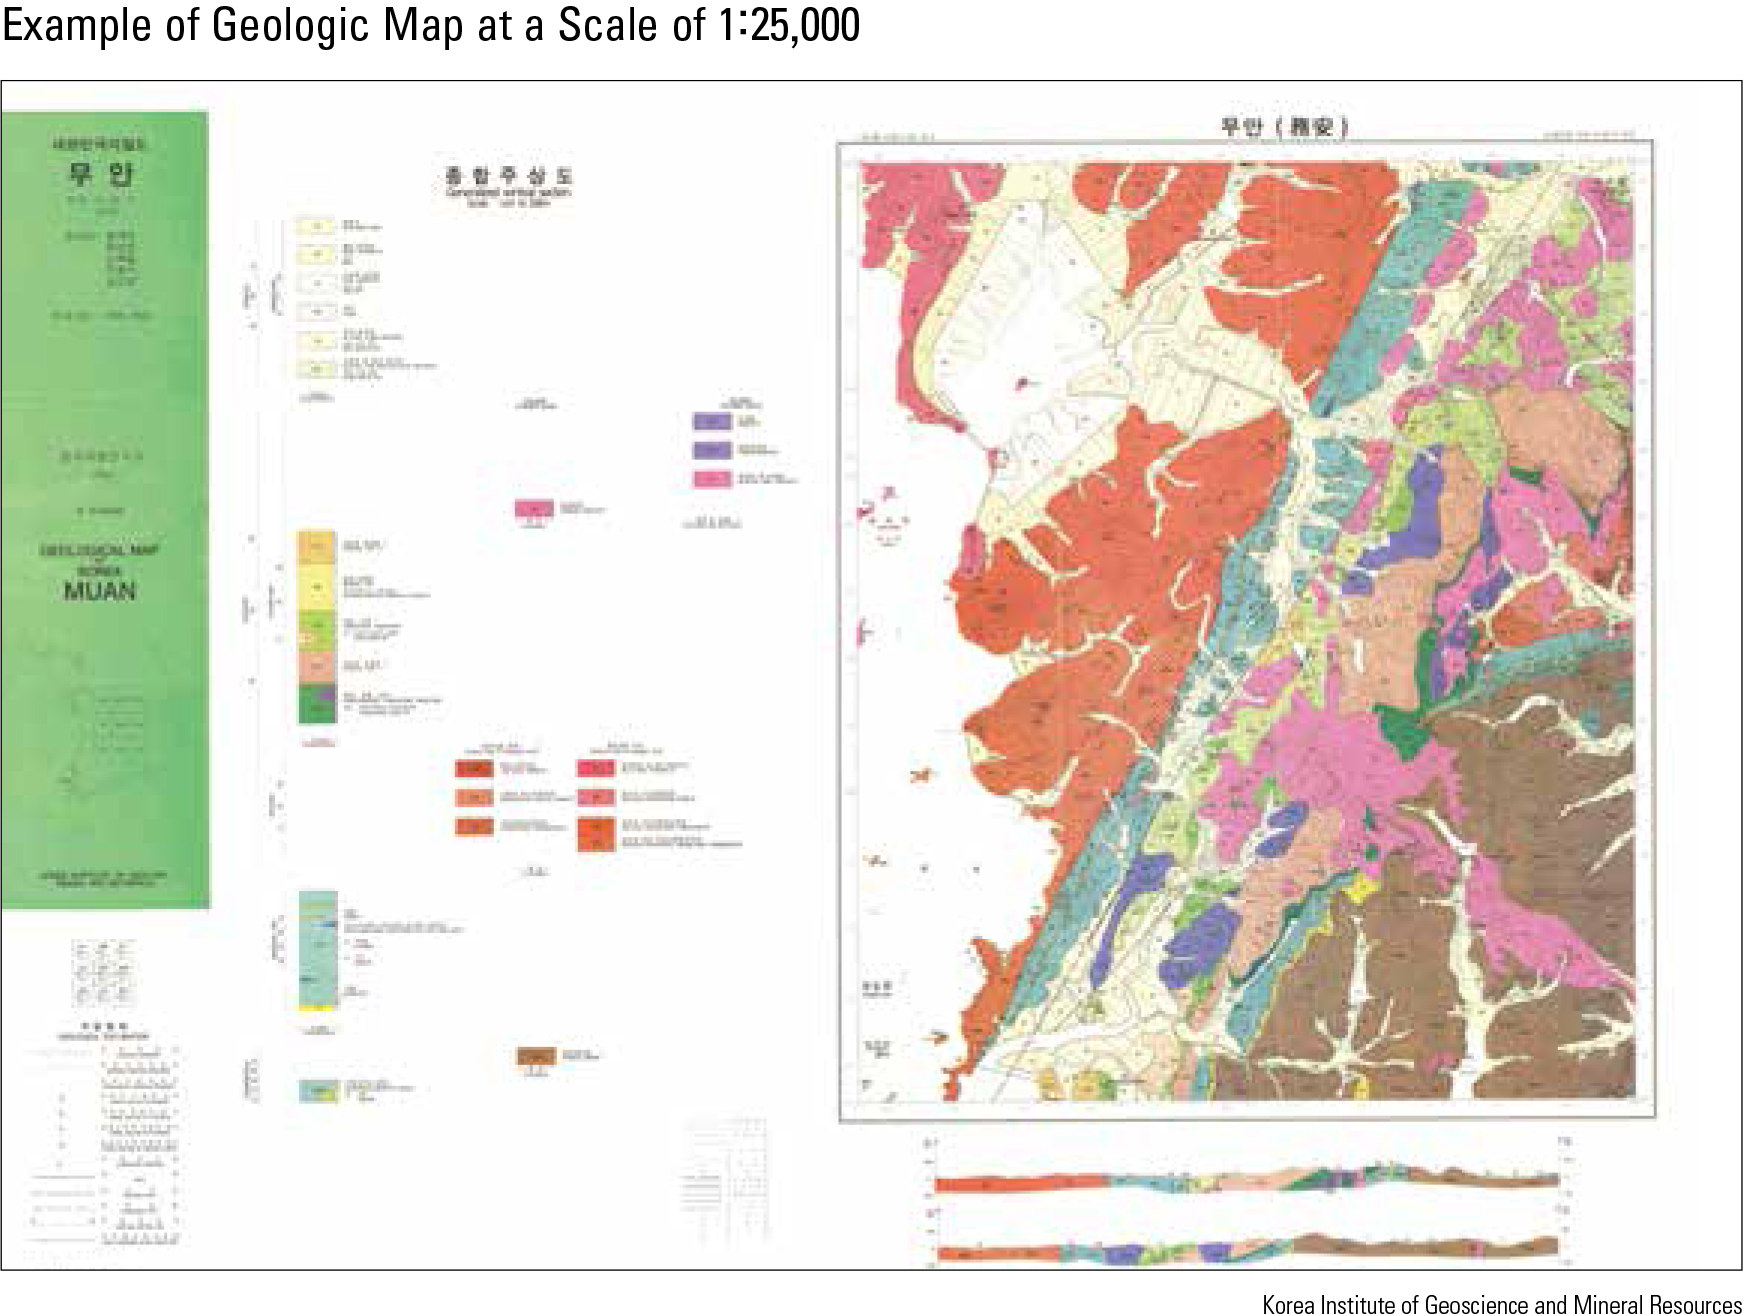 Example of Geologic Map at a Scale of 1:25,000